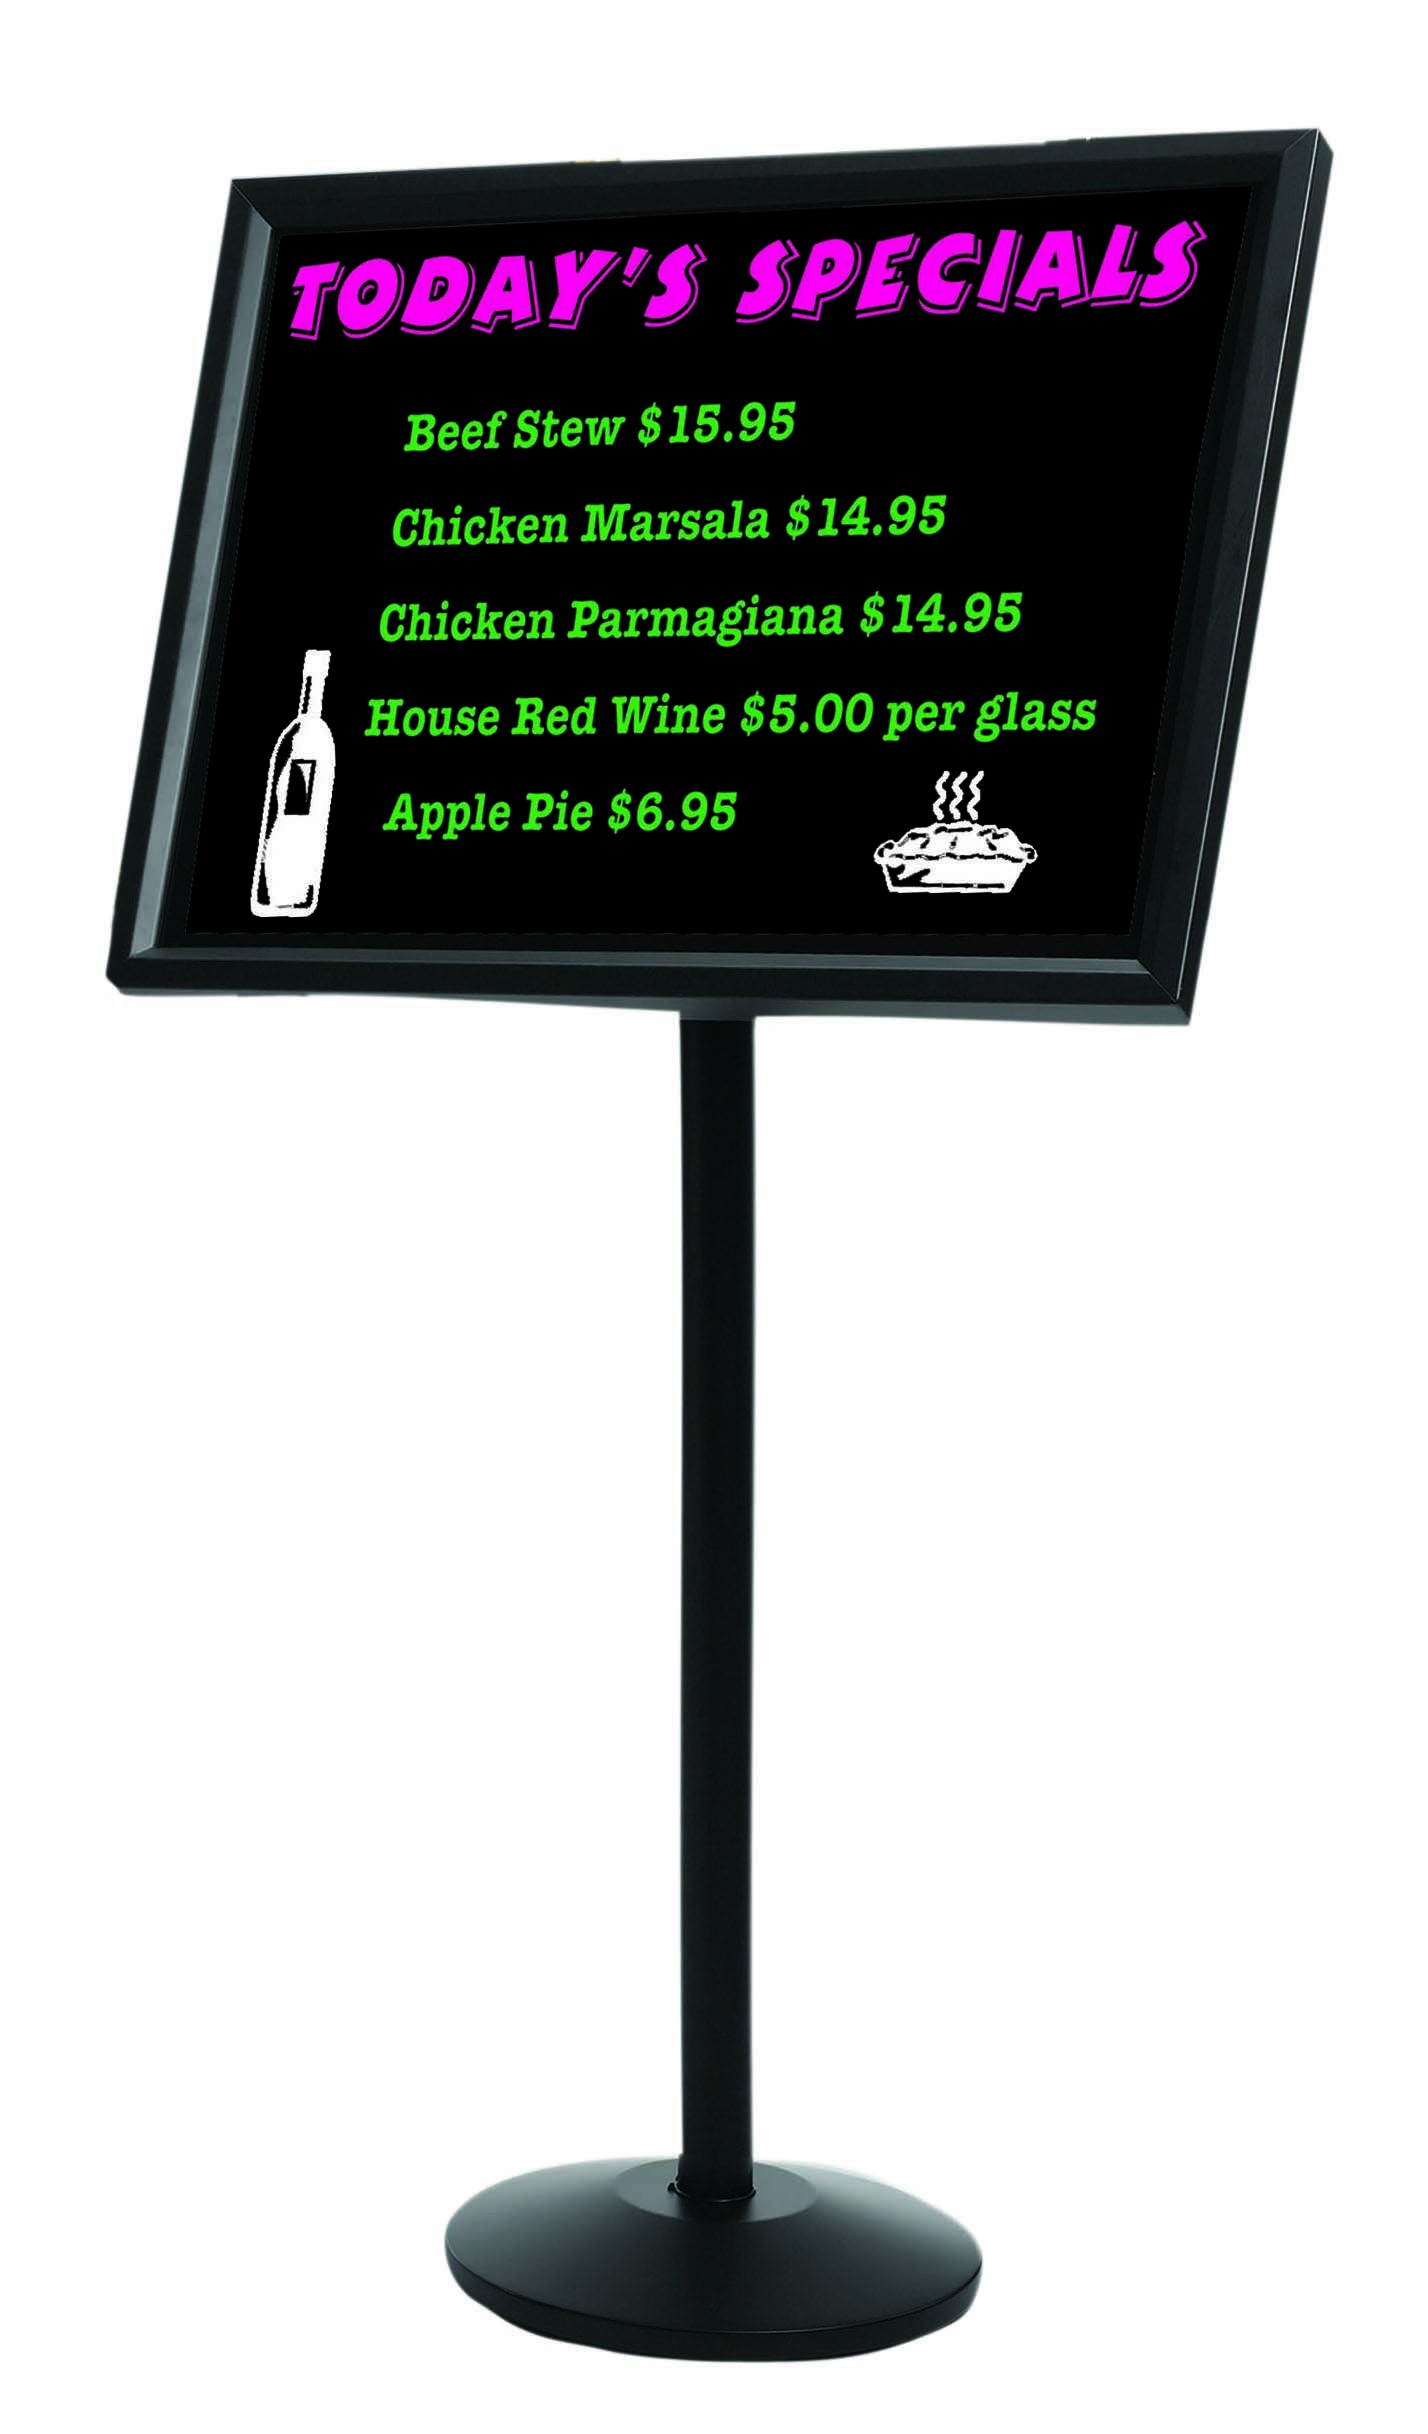 Aarco Products P-7BK Single Pedestal Broadcaster- Black Frame with Markerboard